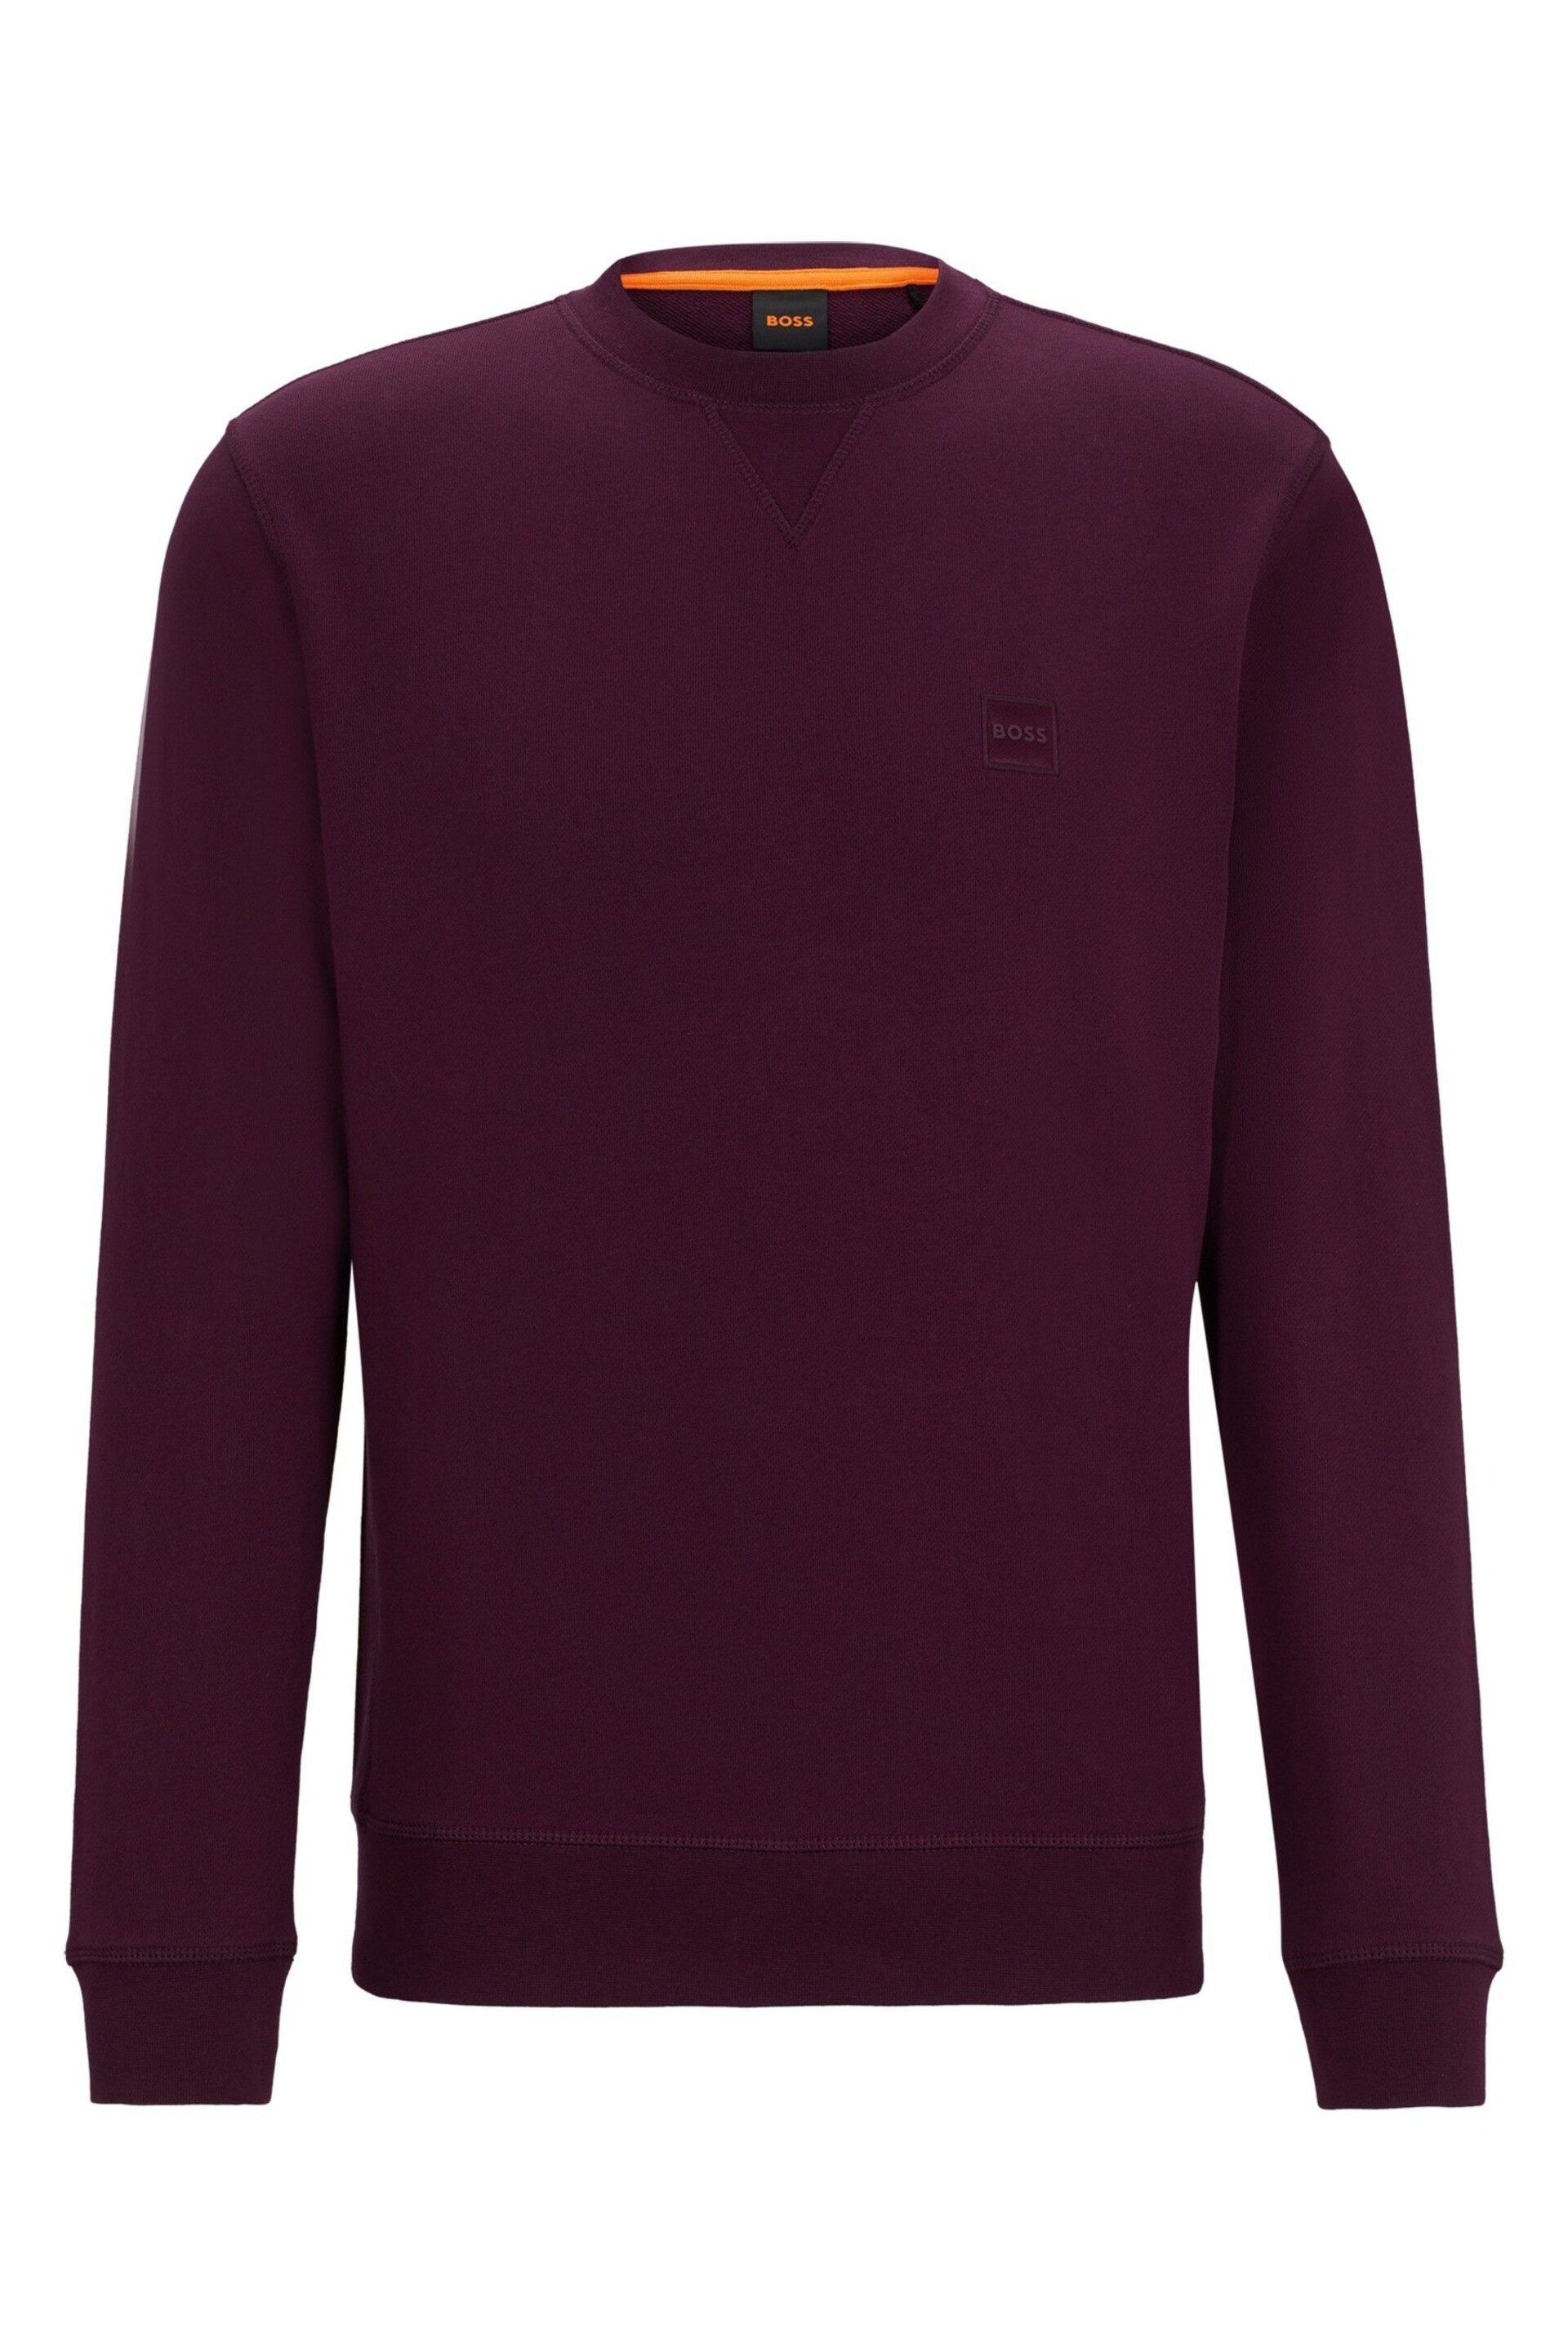 BOSS Purple Cotton Terry Relaxed Fit Sweatshirt - Image 5 of 5